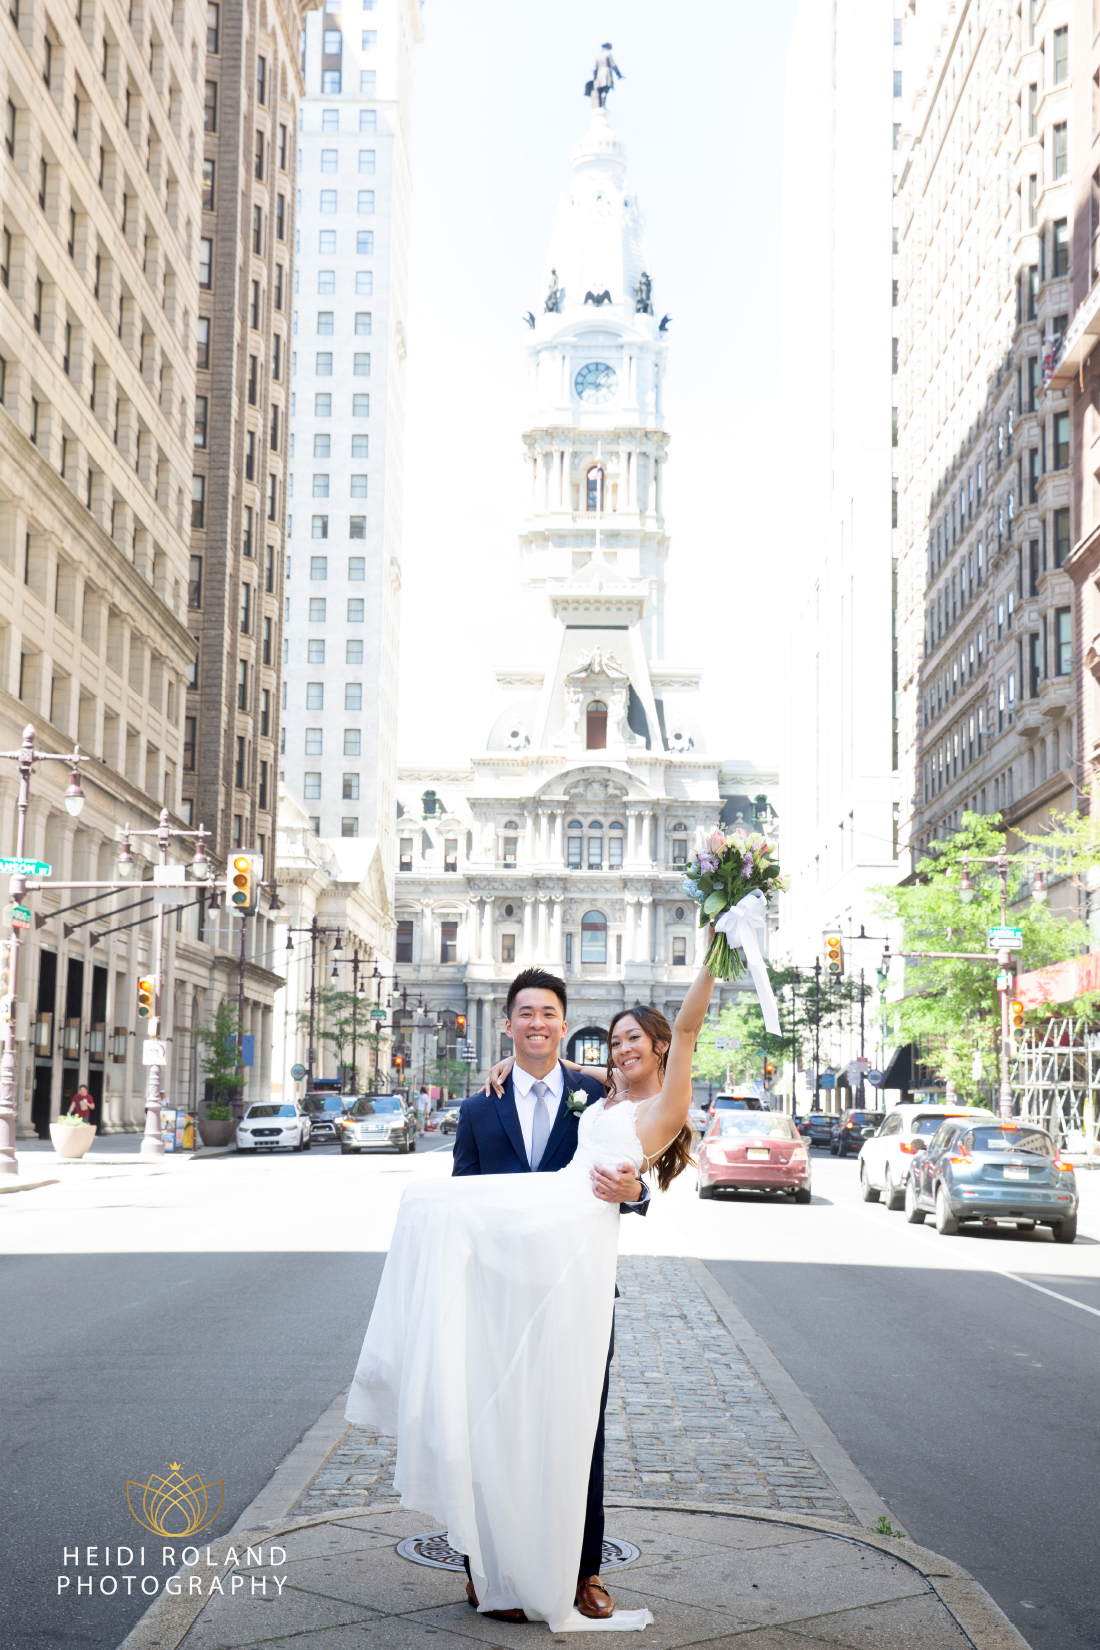 A couple on their wedding day on Broad Street in Philadelphia